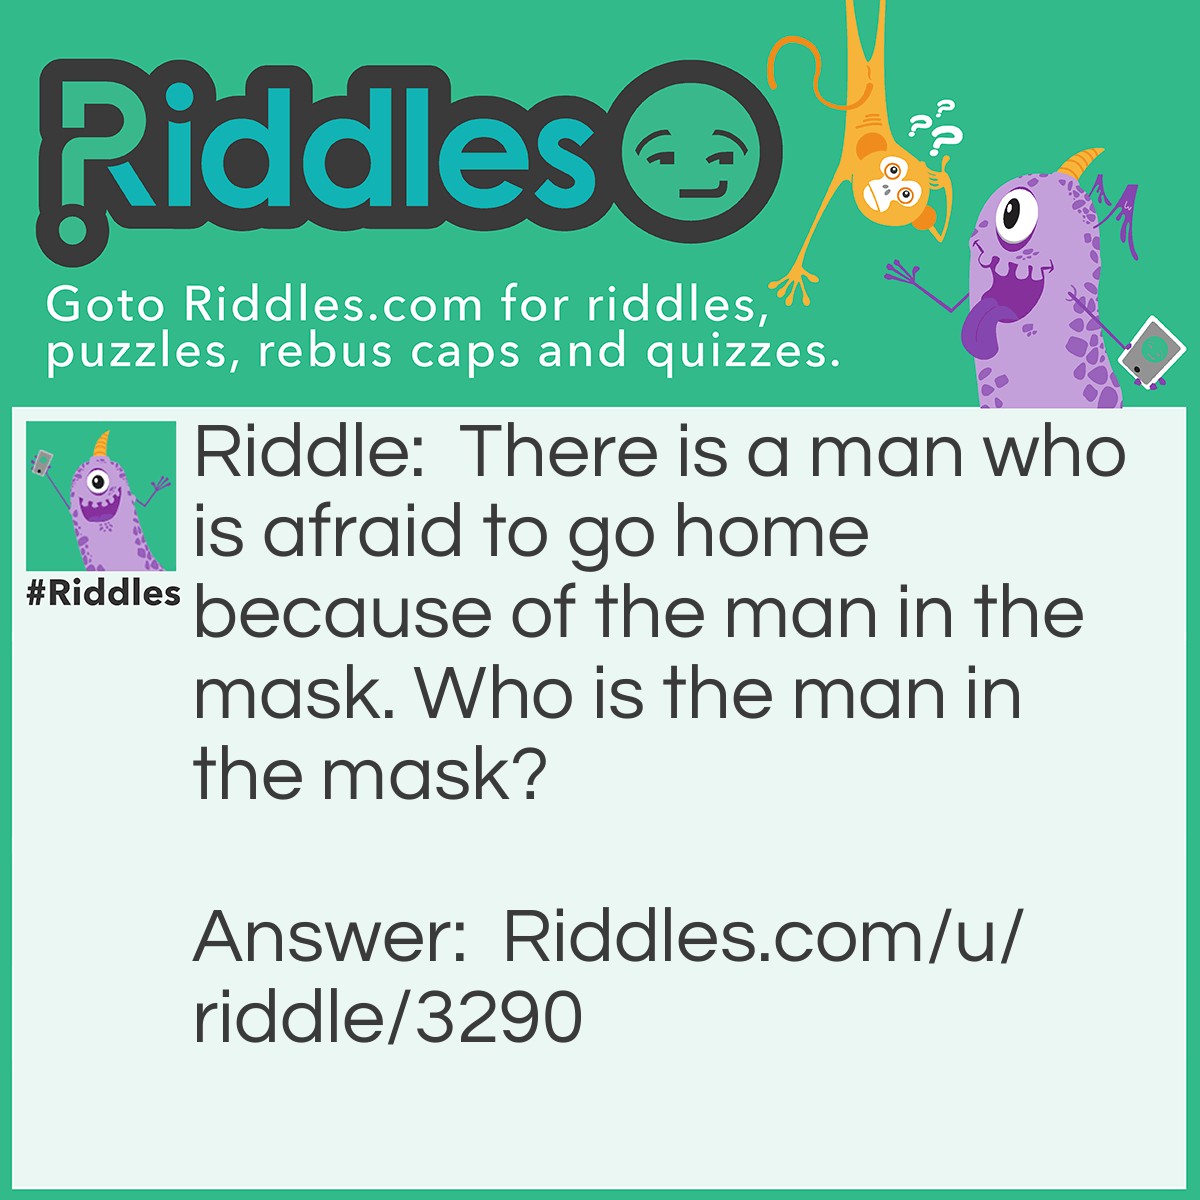 Riddle: There is a man who is afraid to go home because of the man in the mask. Who is the man in the mask? Answer: A baseball catcher.